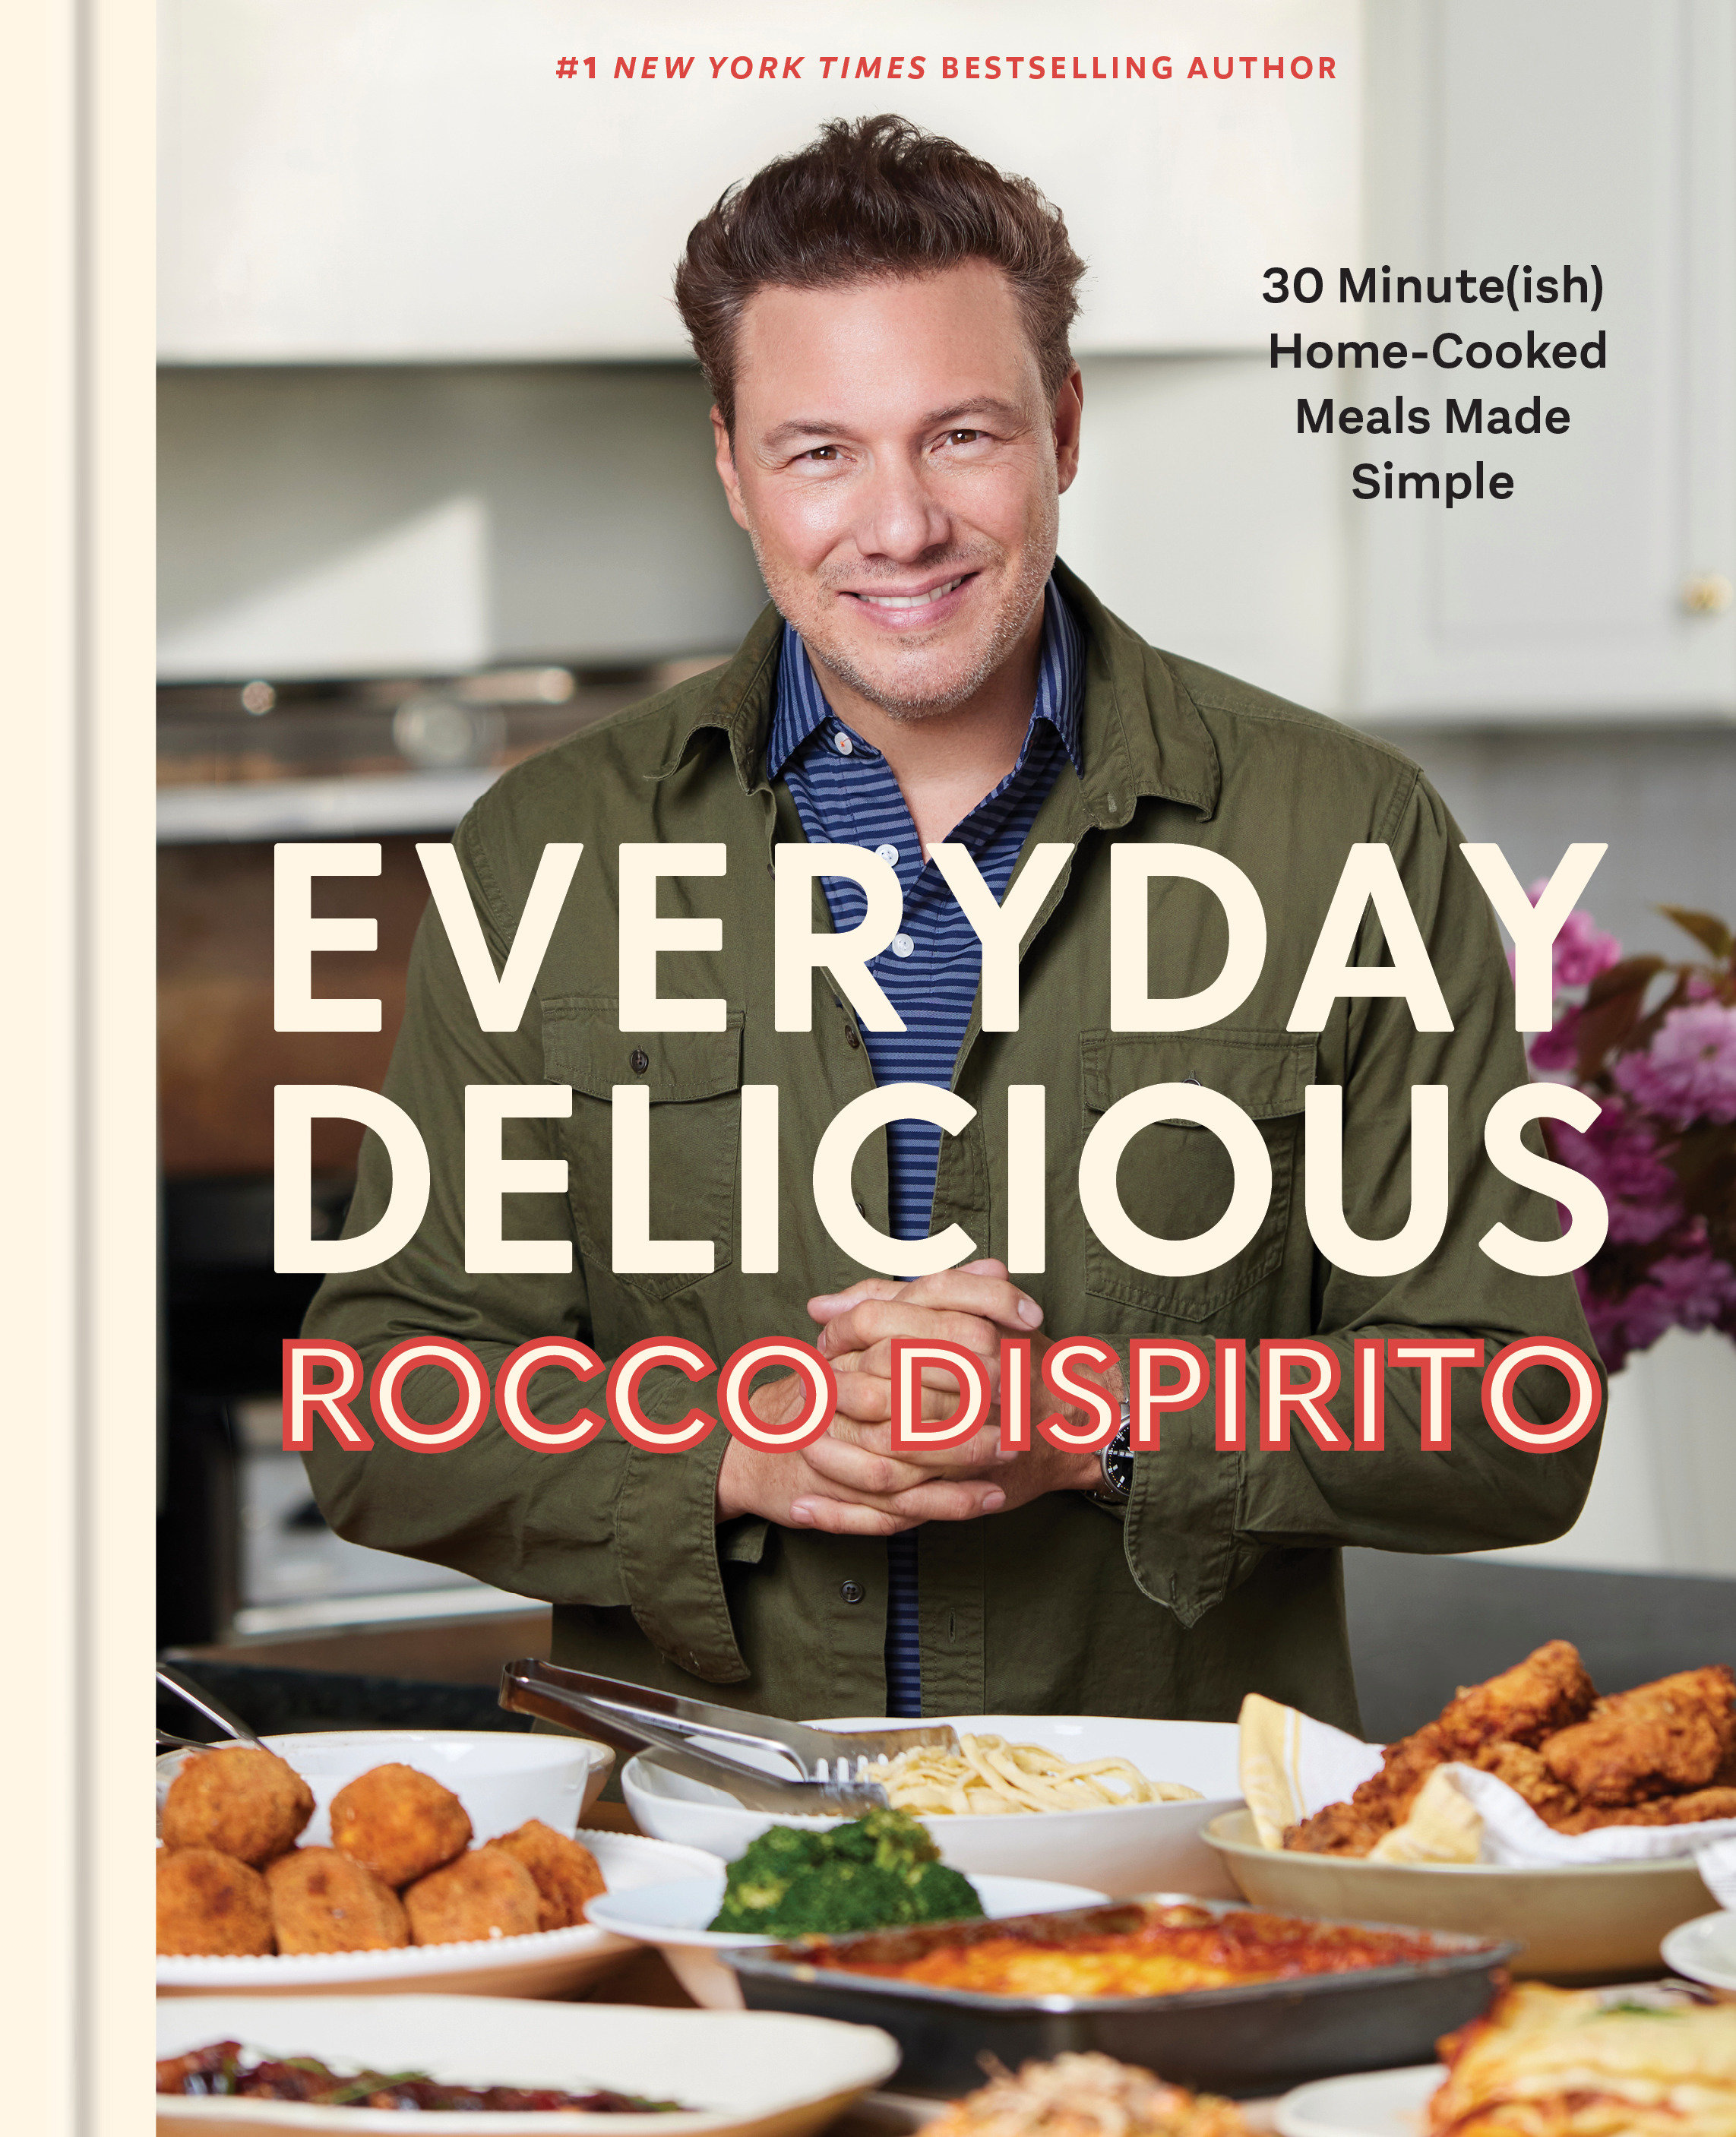 Everyday Delicious 30 Minute(ish) Home-Cooked Meals Made Simple cover image